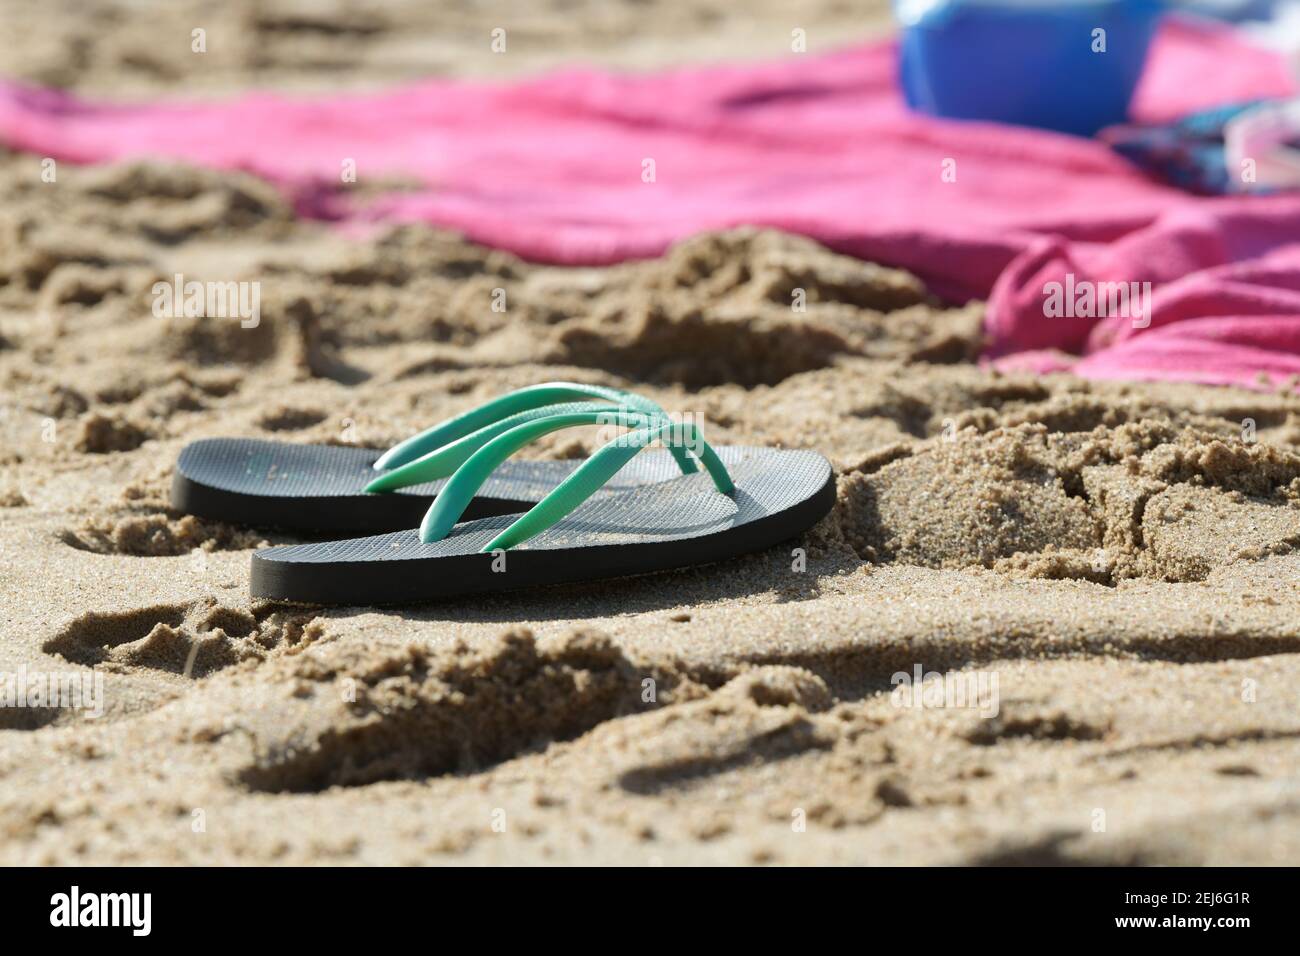 Objects, flip flops on beach sand, close up, seaside holiday, still life, Durban, South Africa, collections of things, summer holidays, slow travel Stock Photo